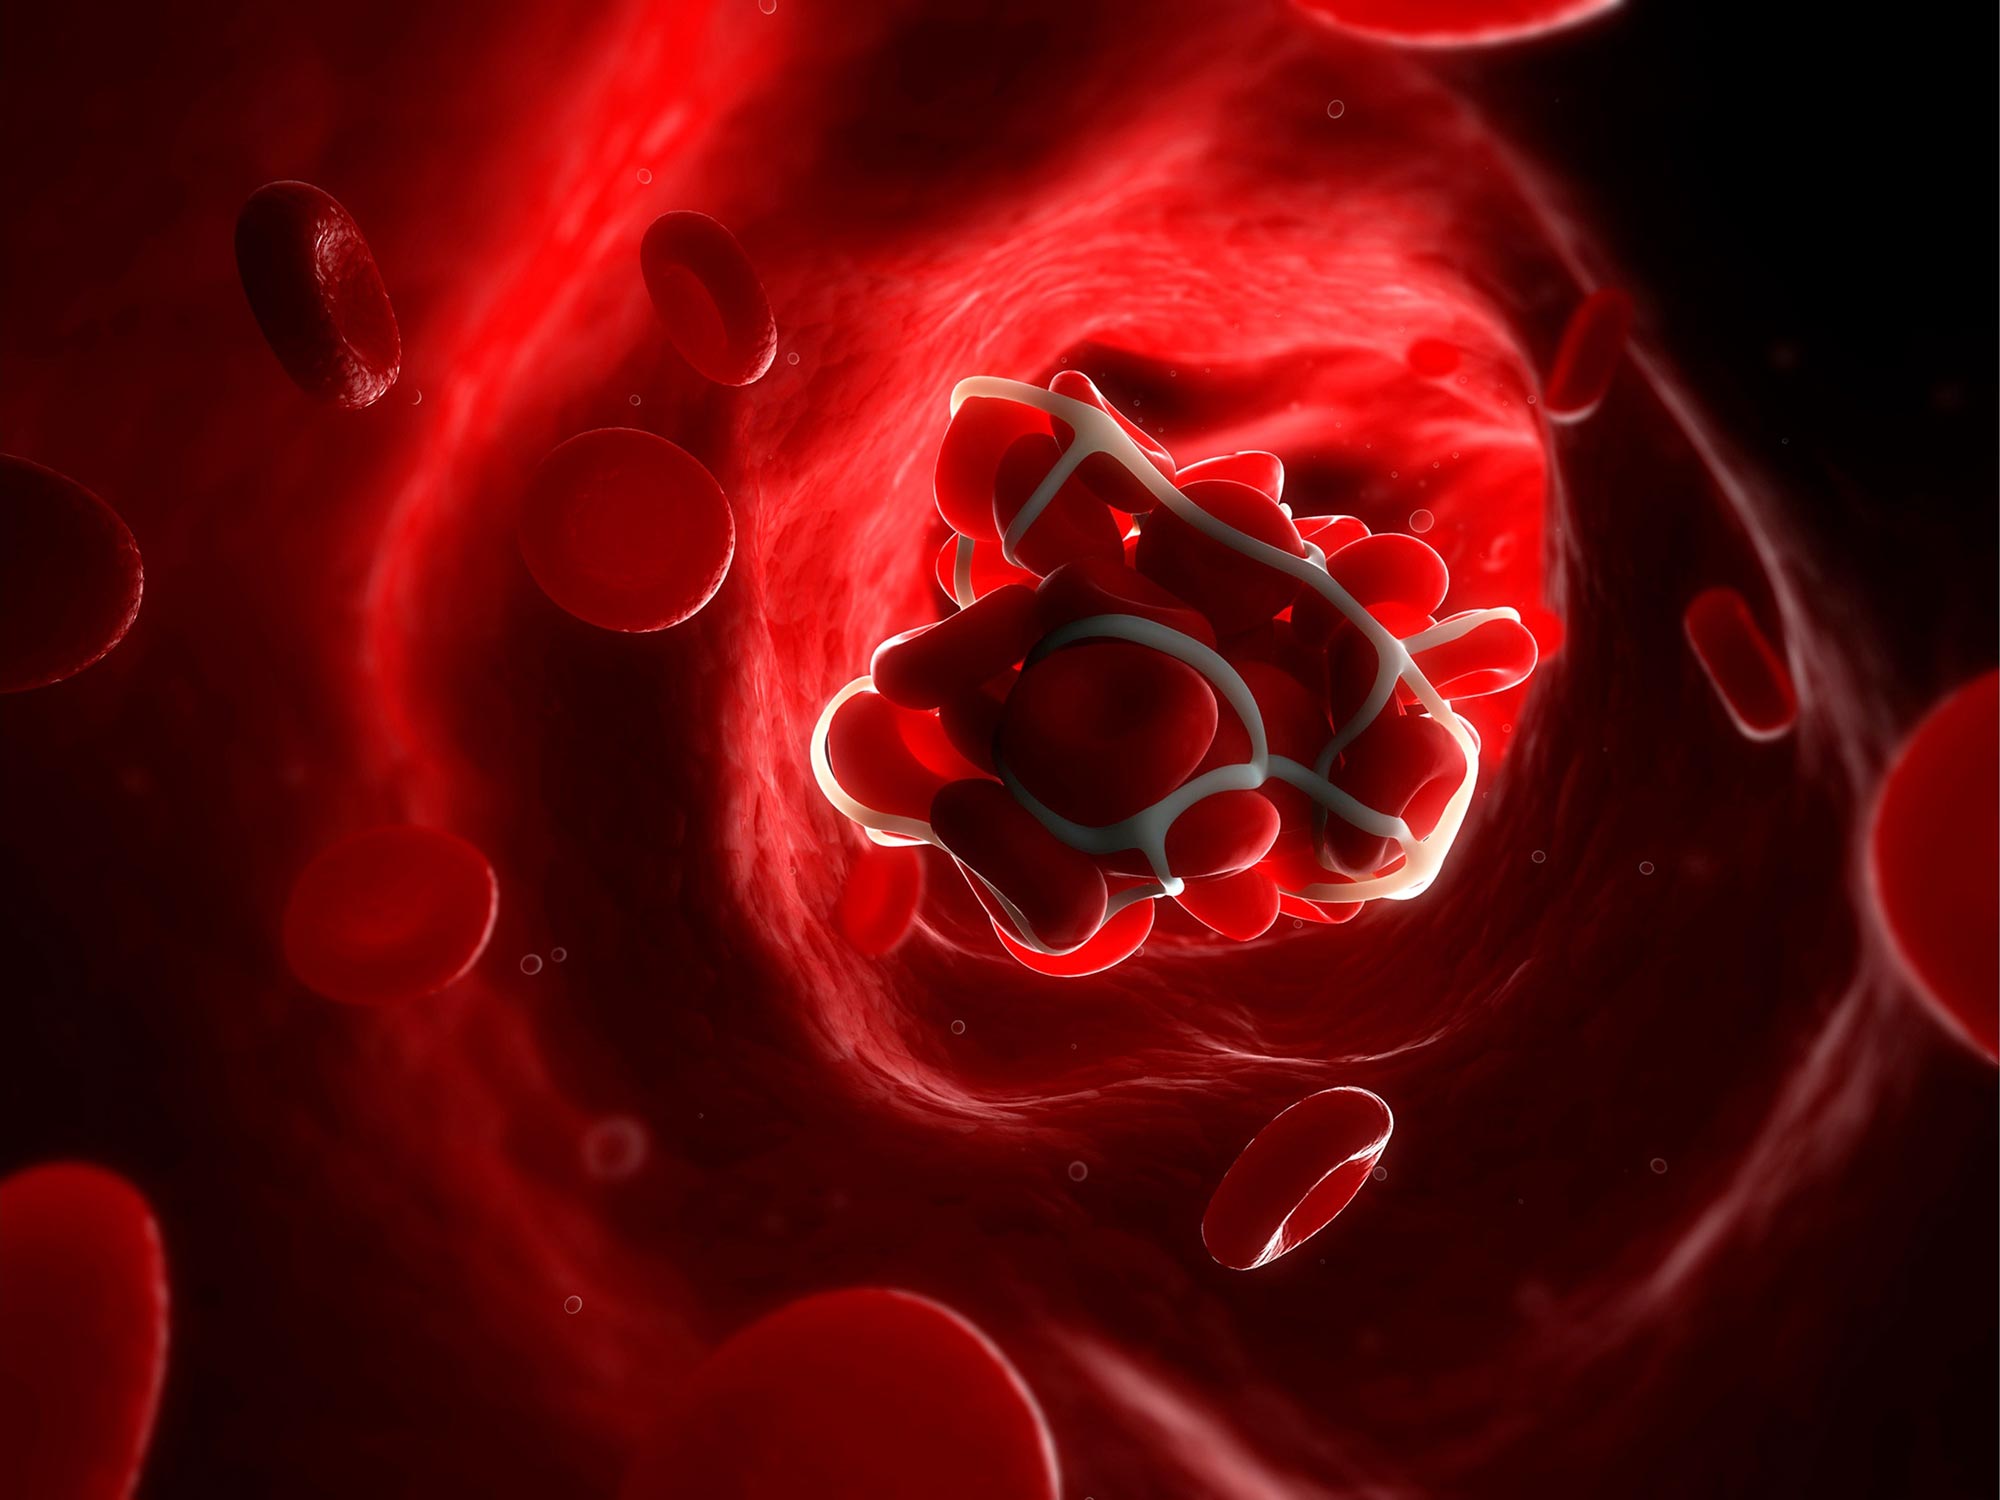 Finding blood clots before they wreak havoc, MIT News